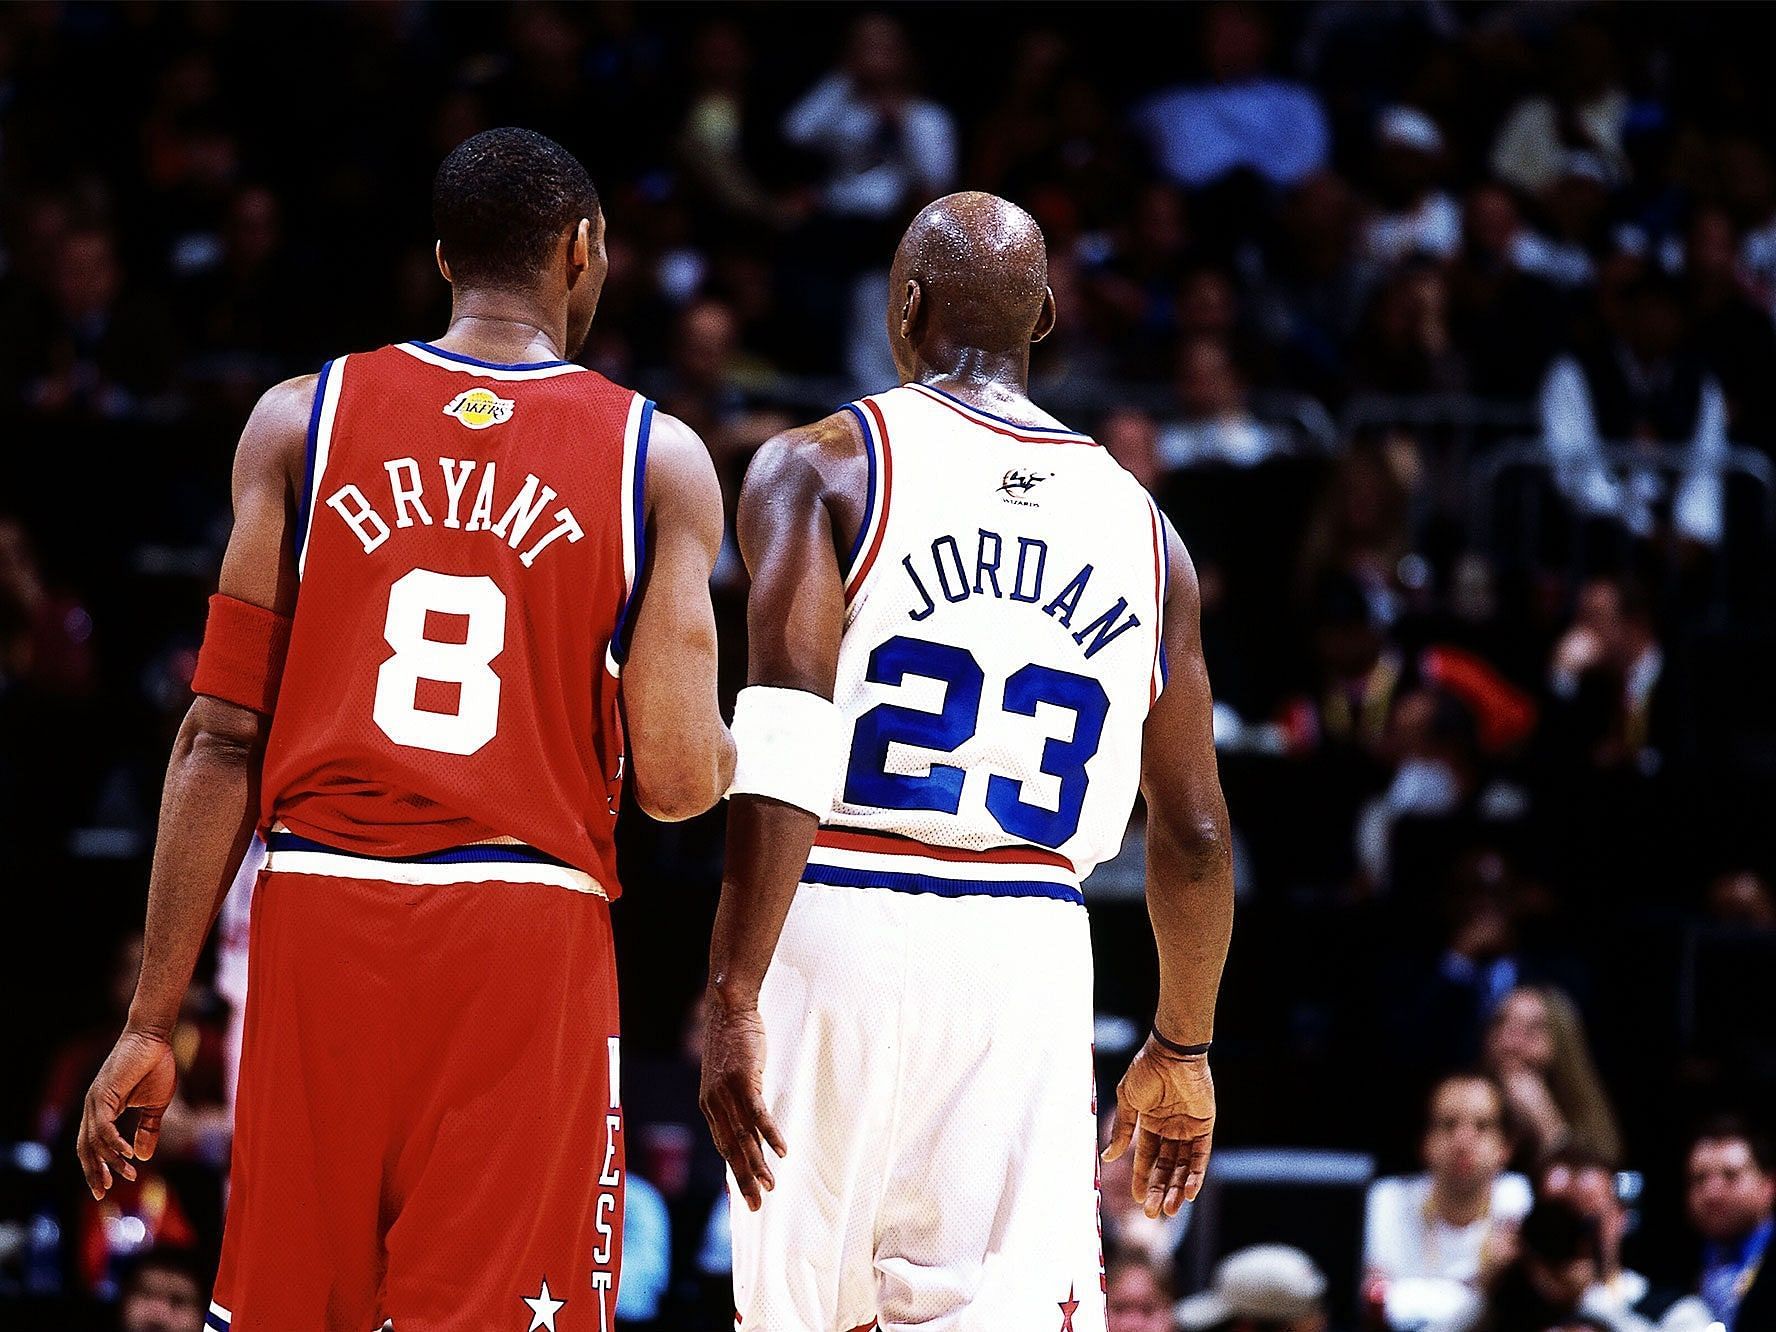 The master and the student played eight head-to-head games with Kobe Bryant winning five of them. [Photo: Vanity Fair]